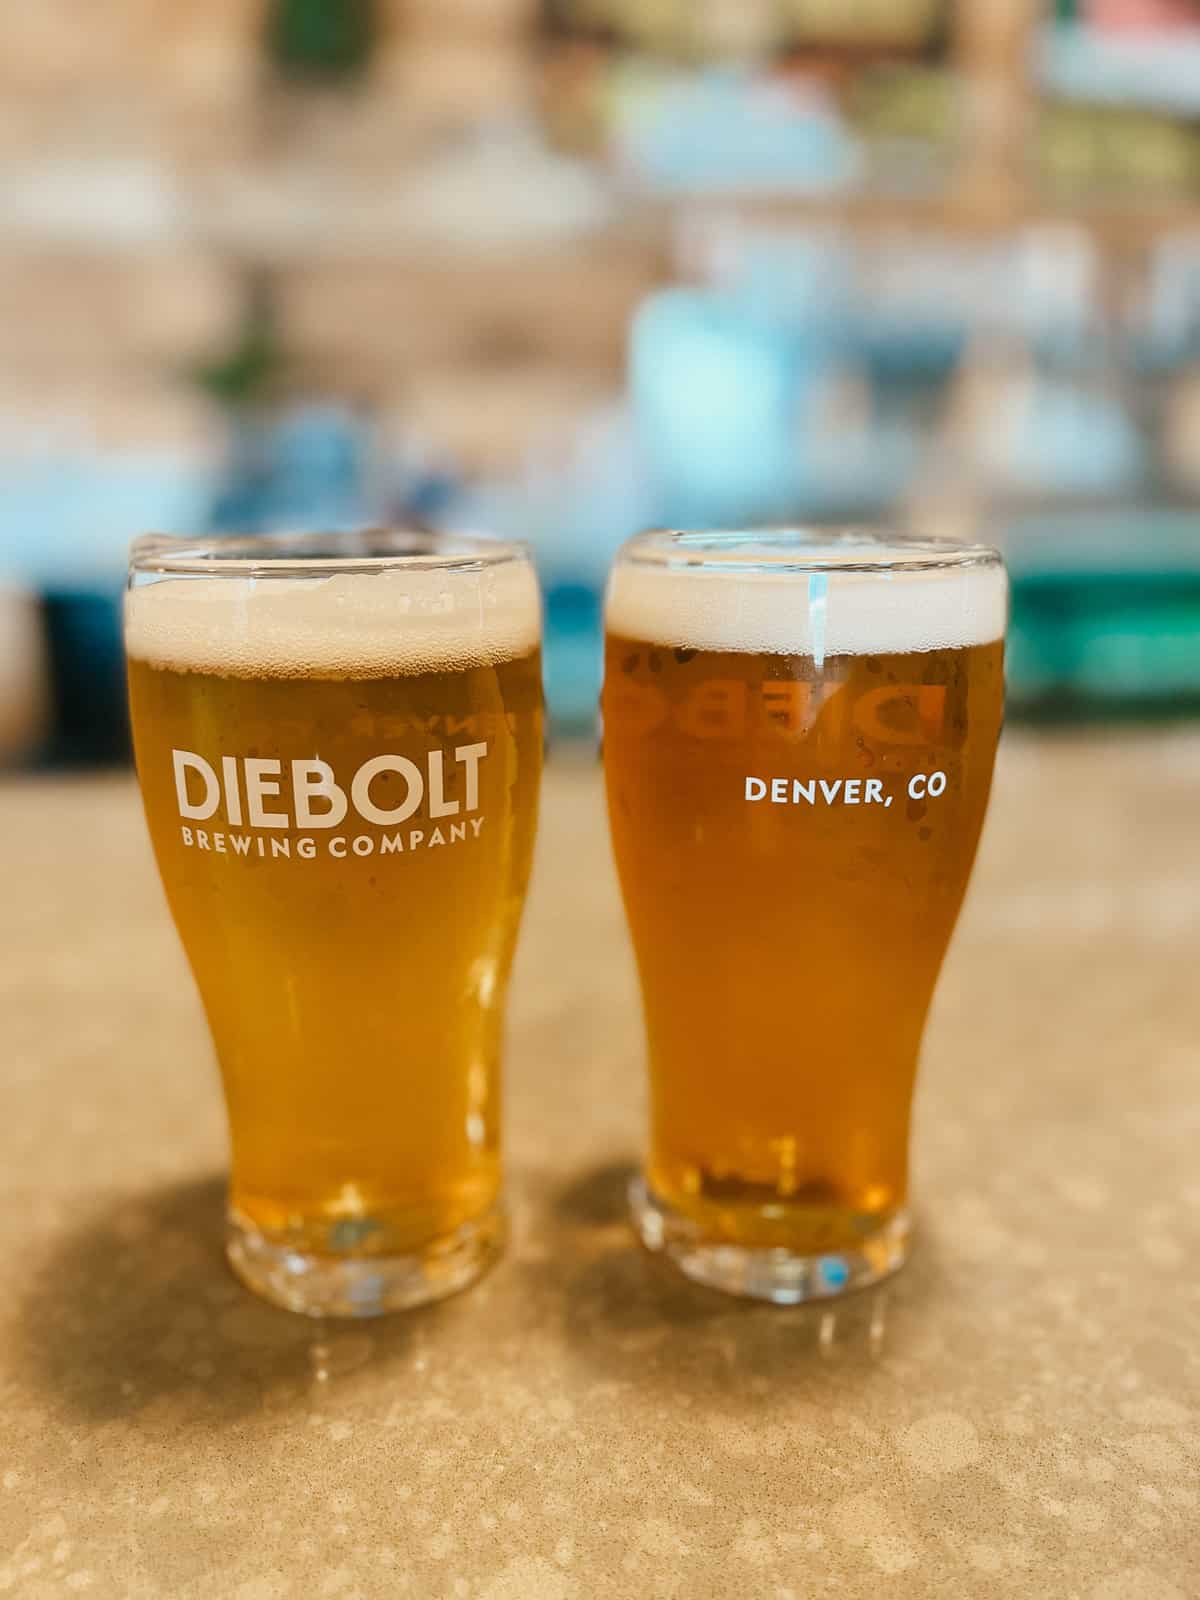 Two beers at Diebolt Brewing Company.